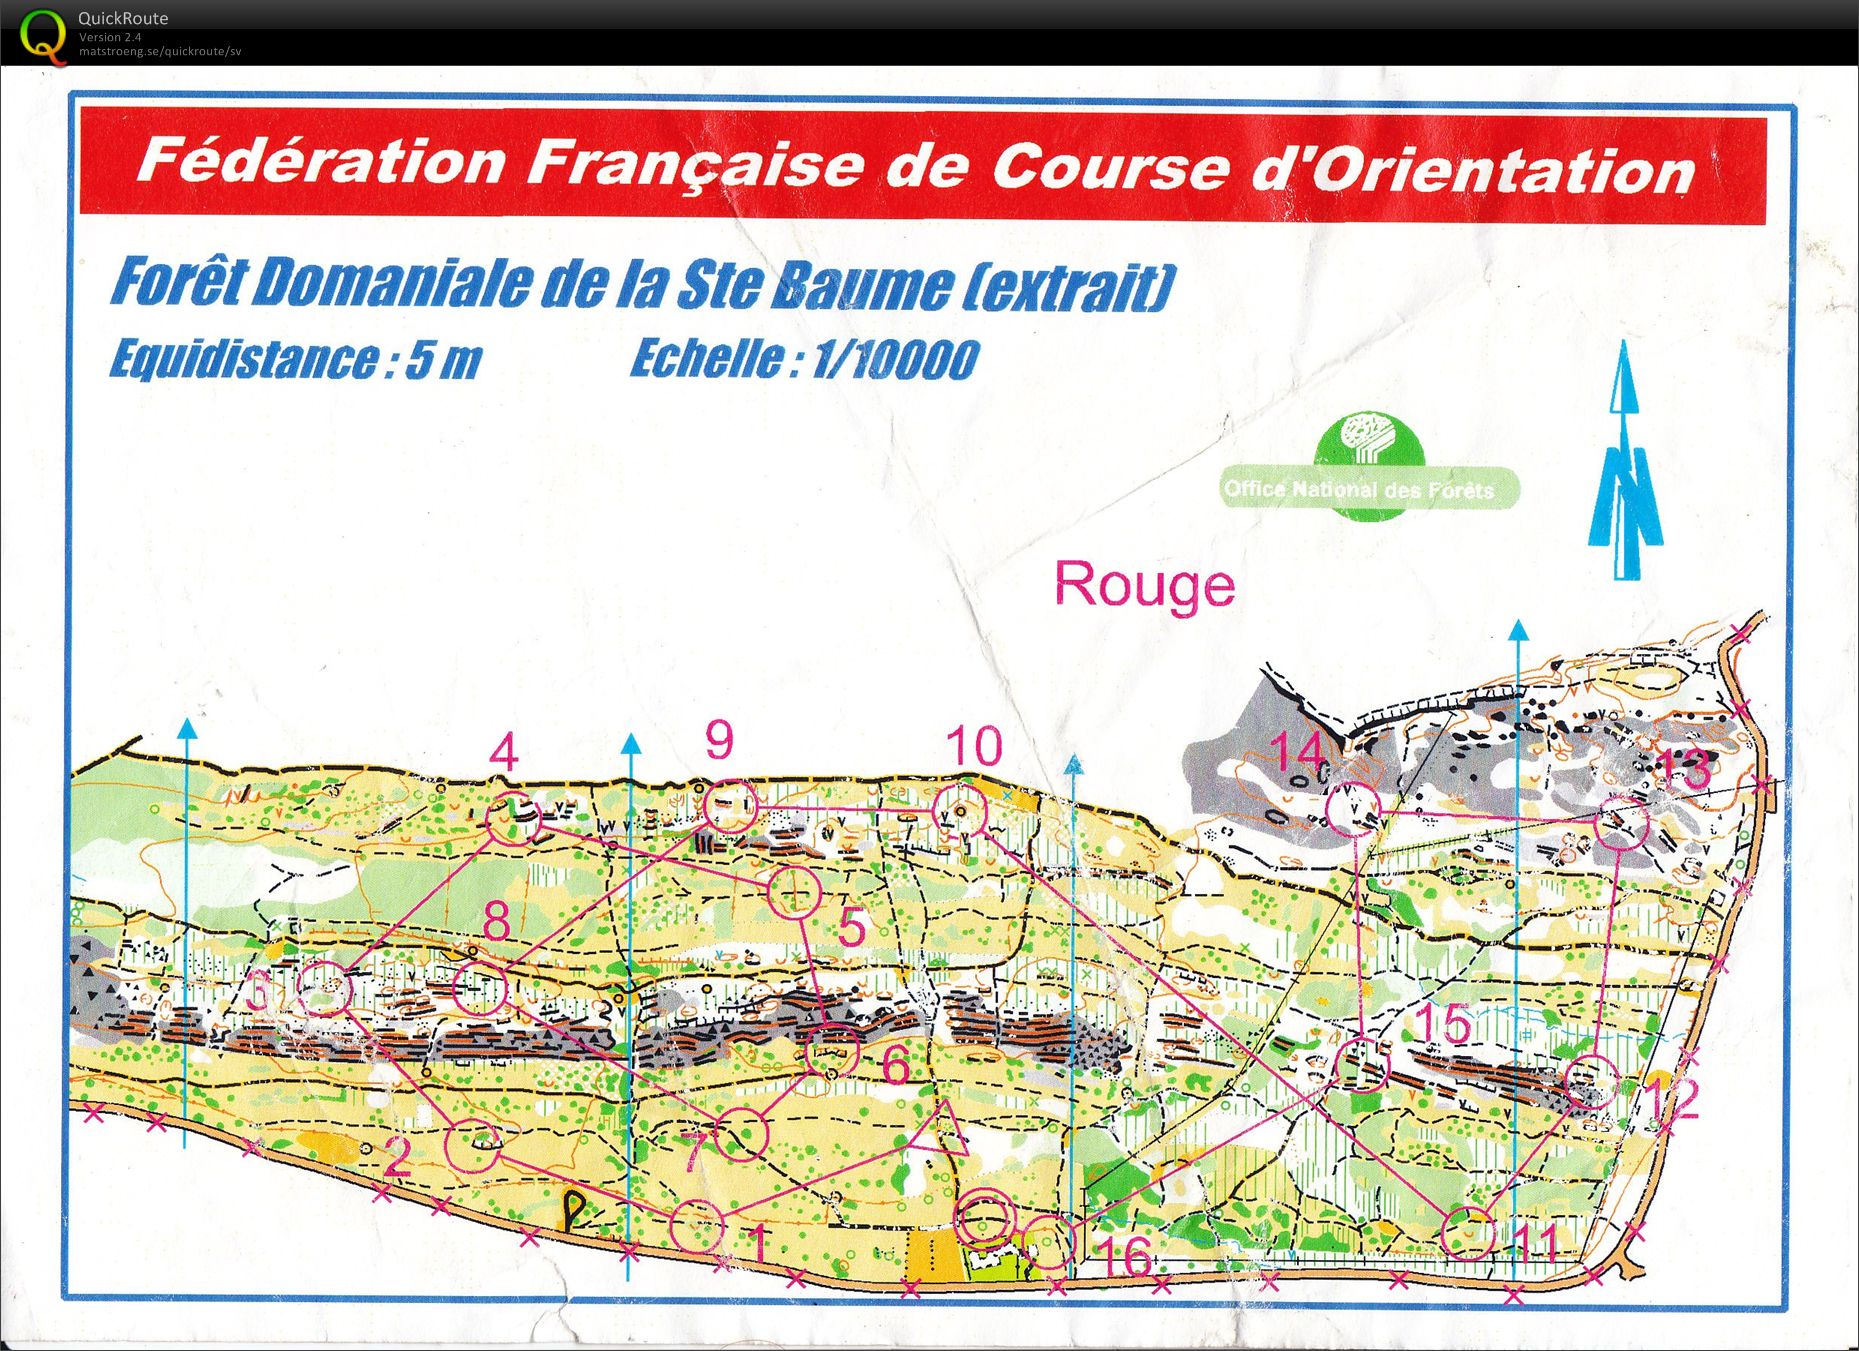 France Military preperation for Comp (2012-05-09)